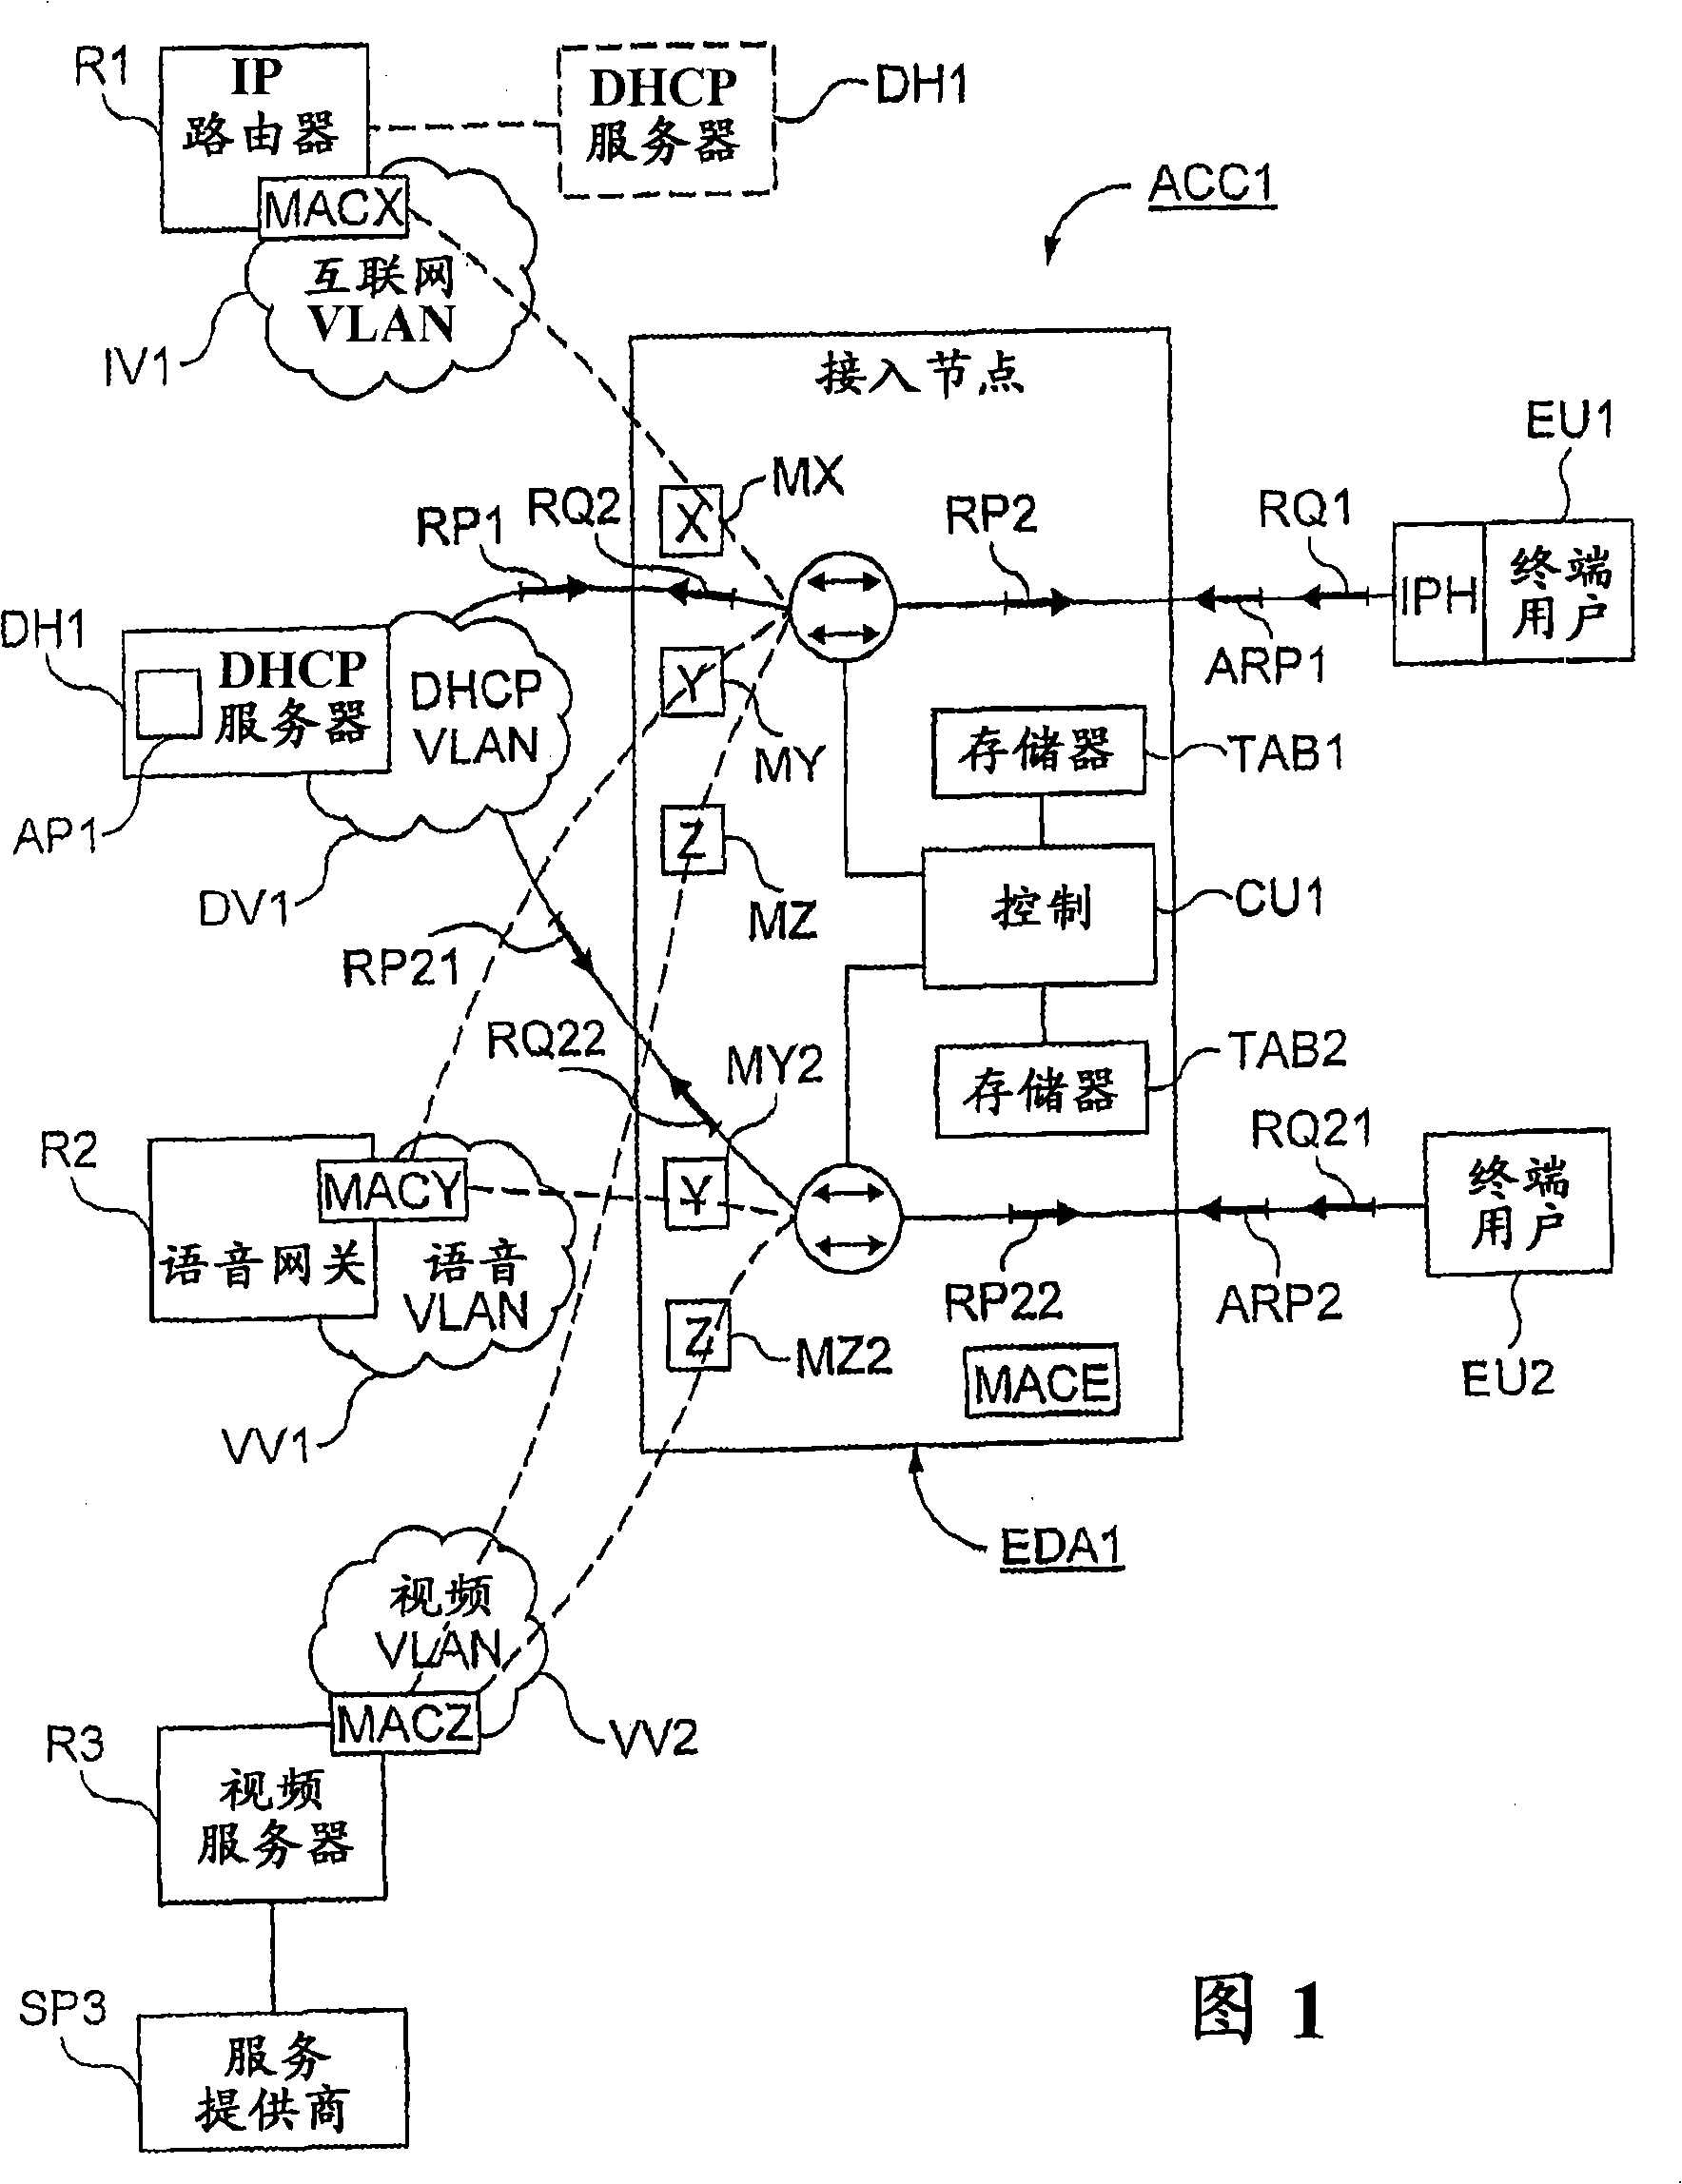 Method and apparatus for access to system